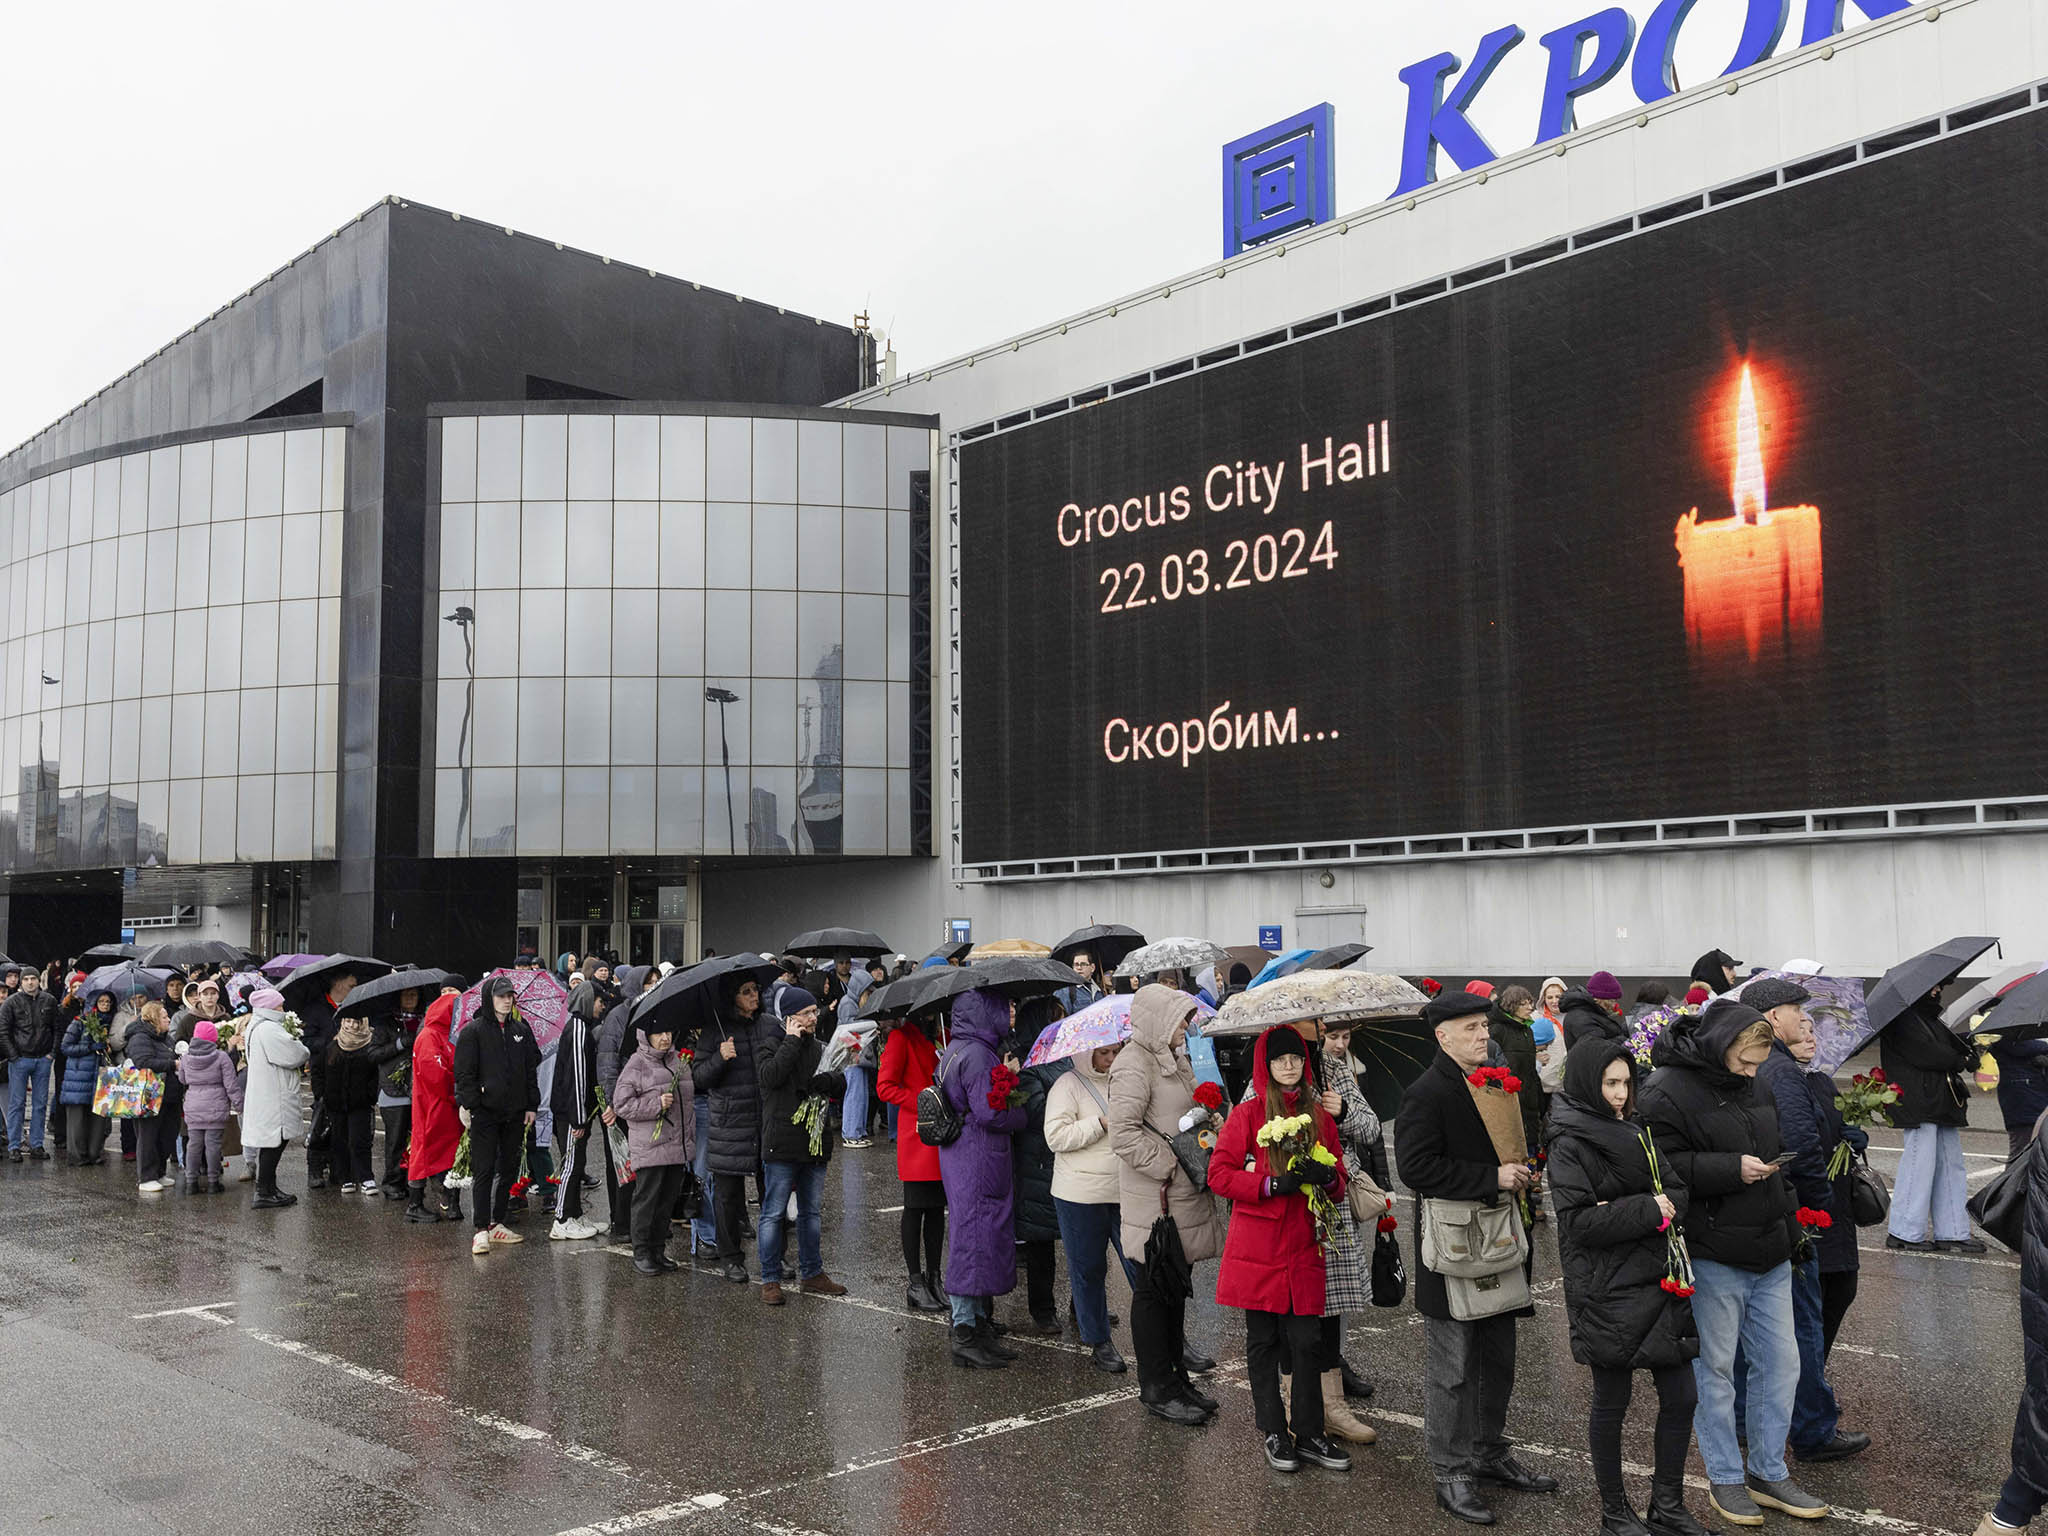 People line up to lay flowers at a makeshift memorial near Crocus City Hall, where 140 people were killed March 22 night in an attack, outside Moscow on March 24, 2024. (Nanna Heitmann/The New York Times) 